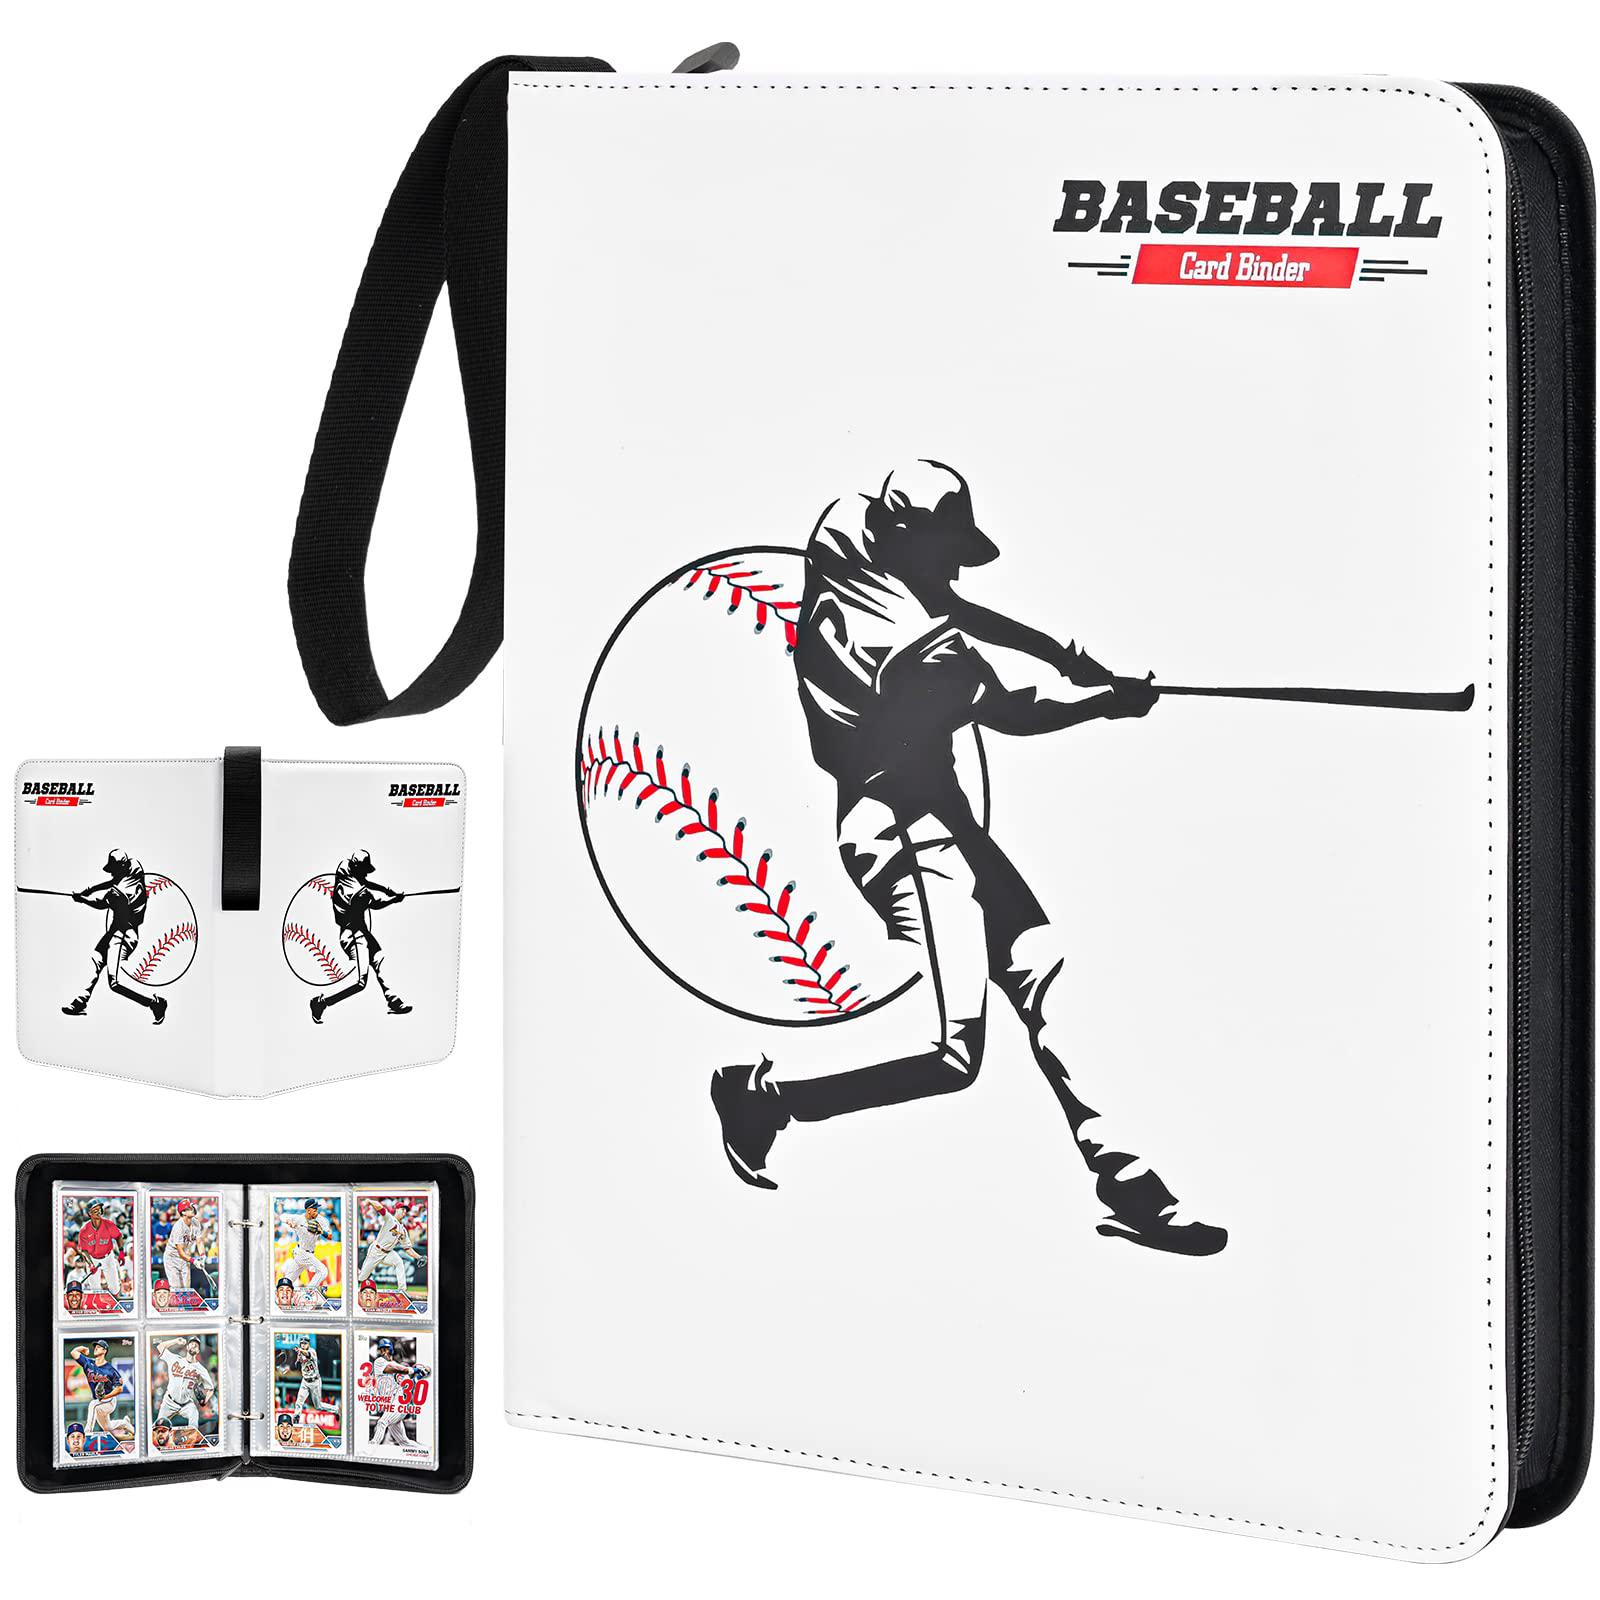 procase 4-pocket baseball card binder fits 440 cards, sport trading card album book with 55 sleeves for baseball colletible c